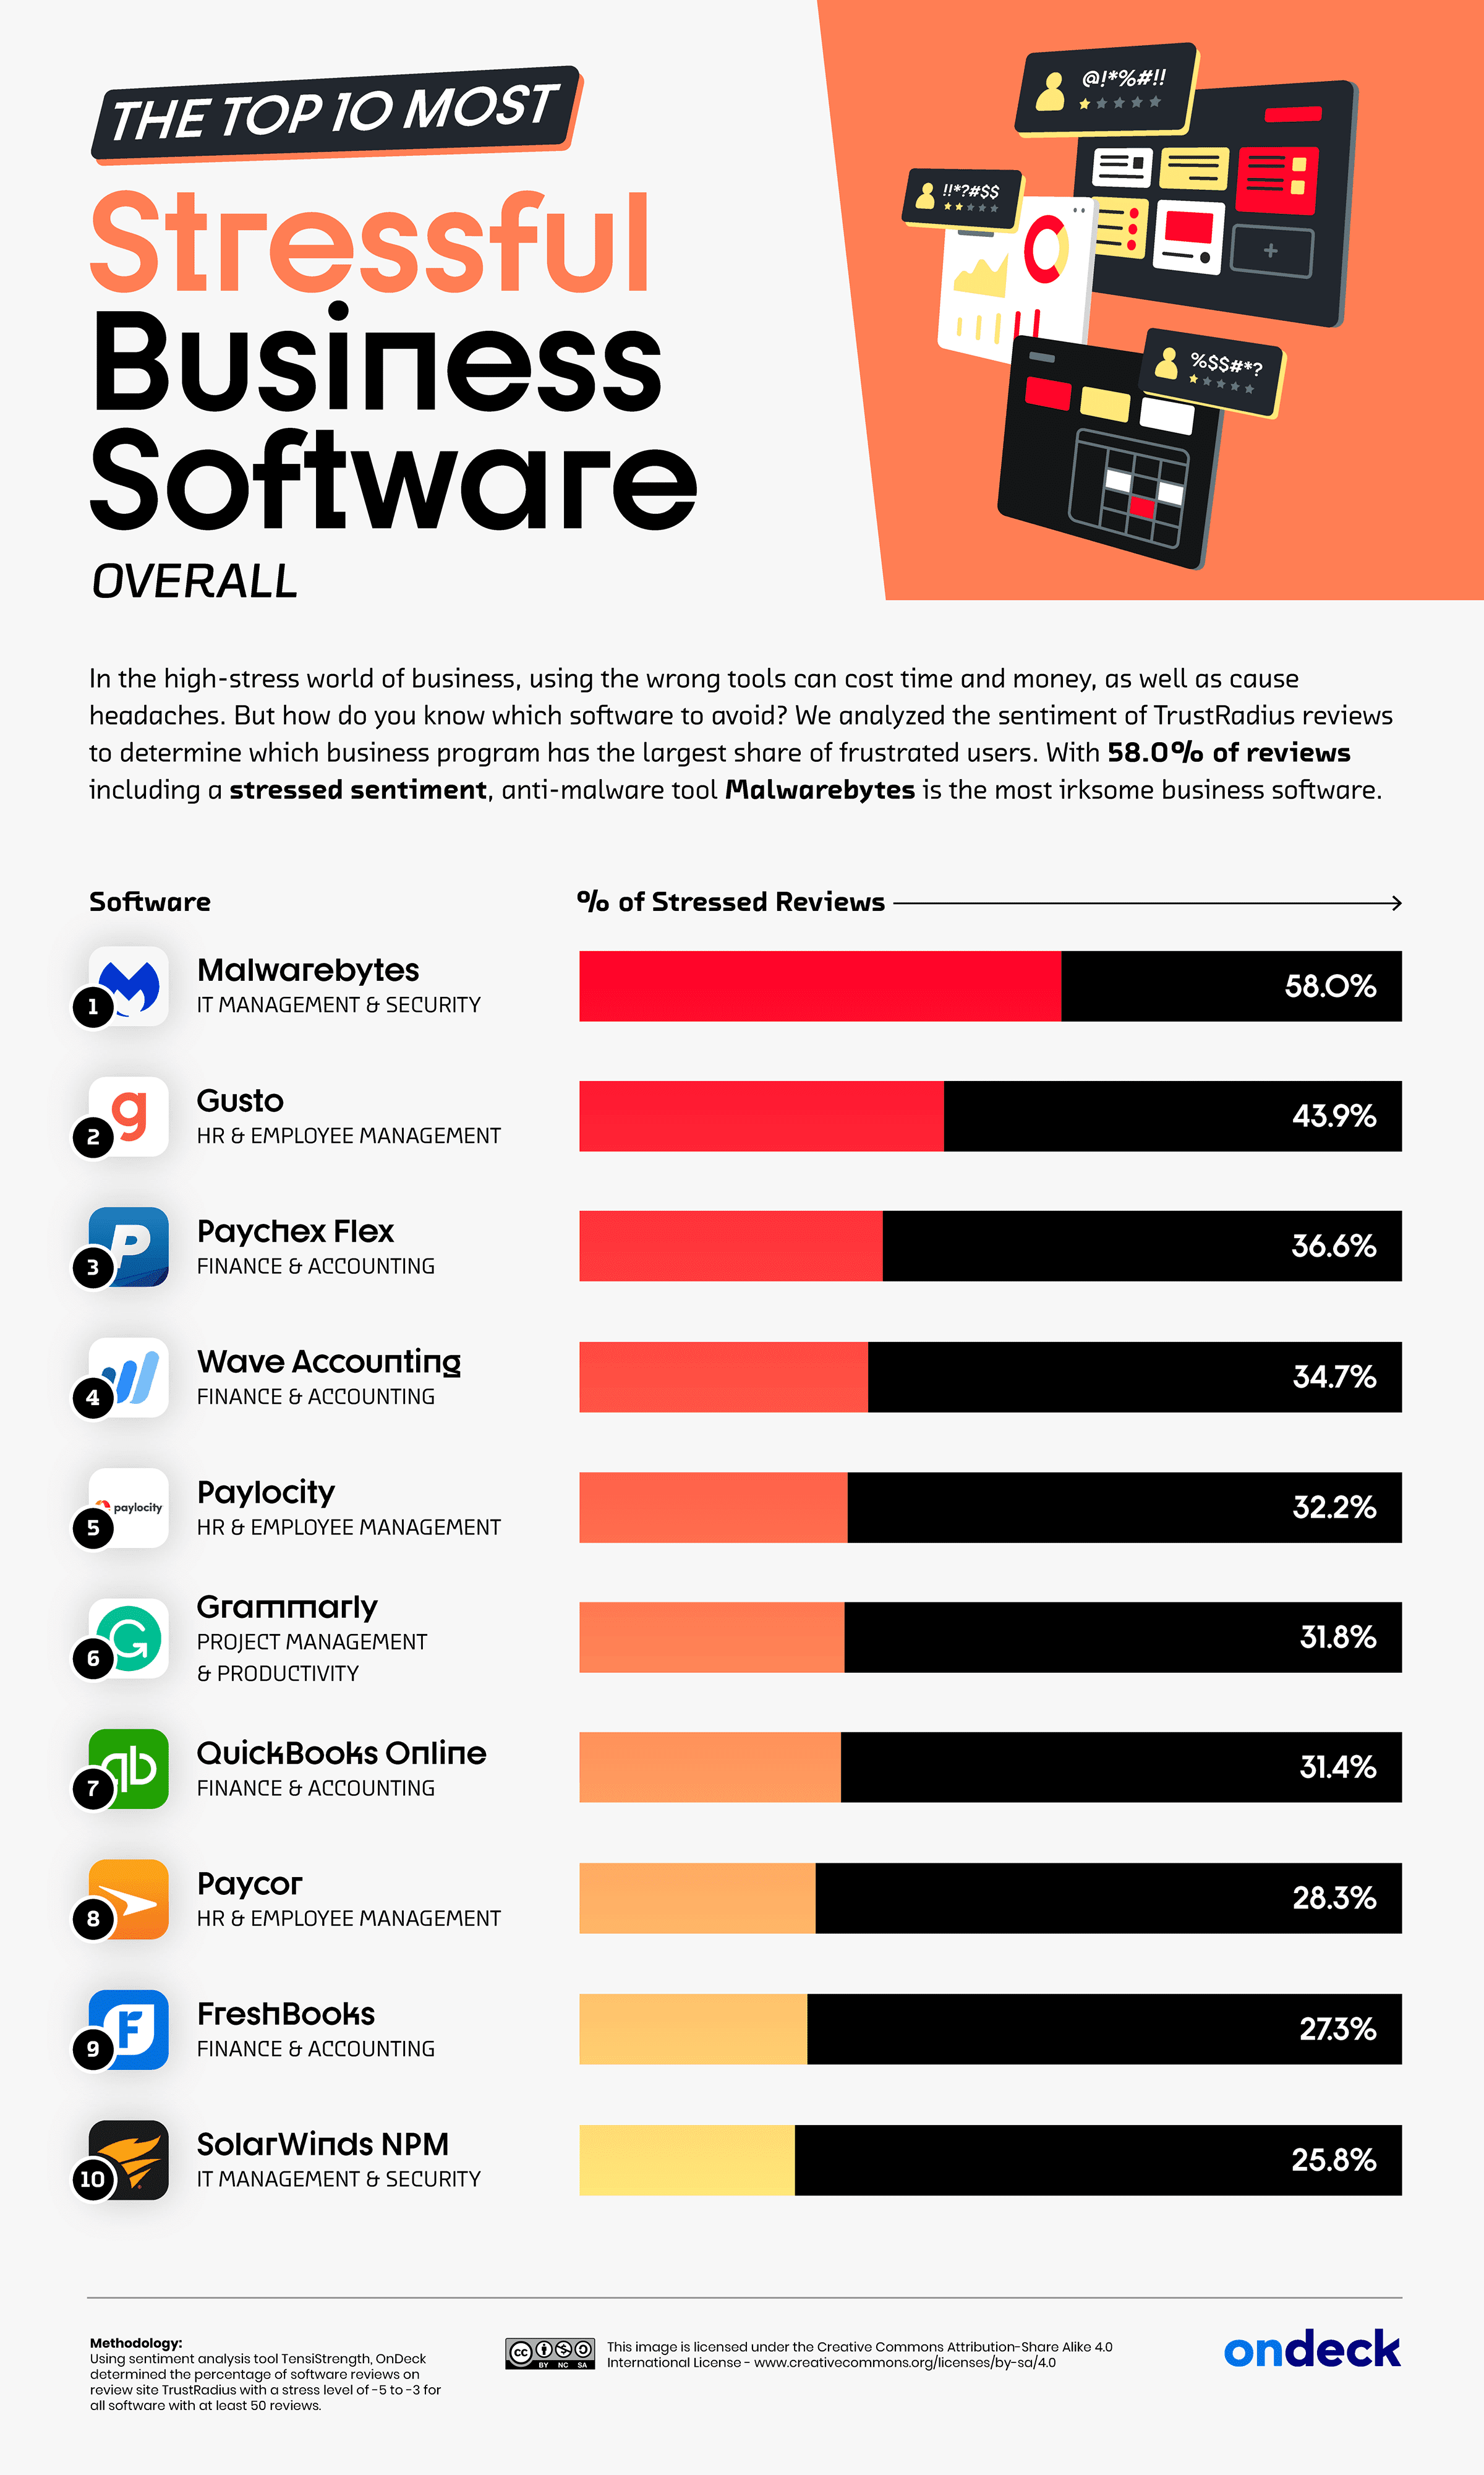 Most companies are buying the wrong software